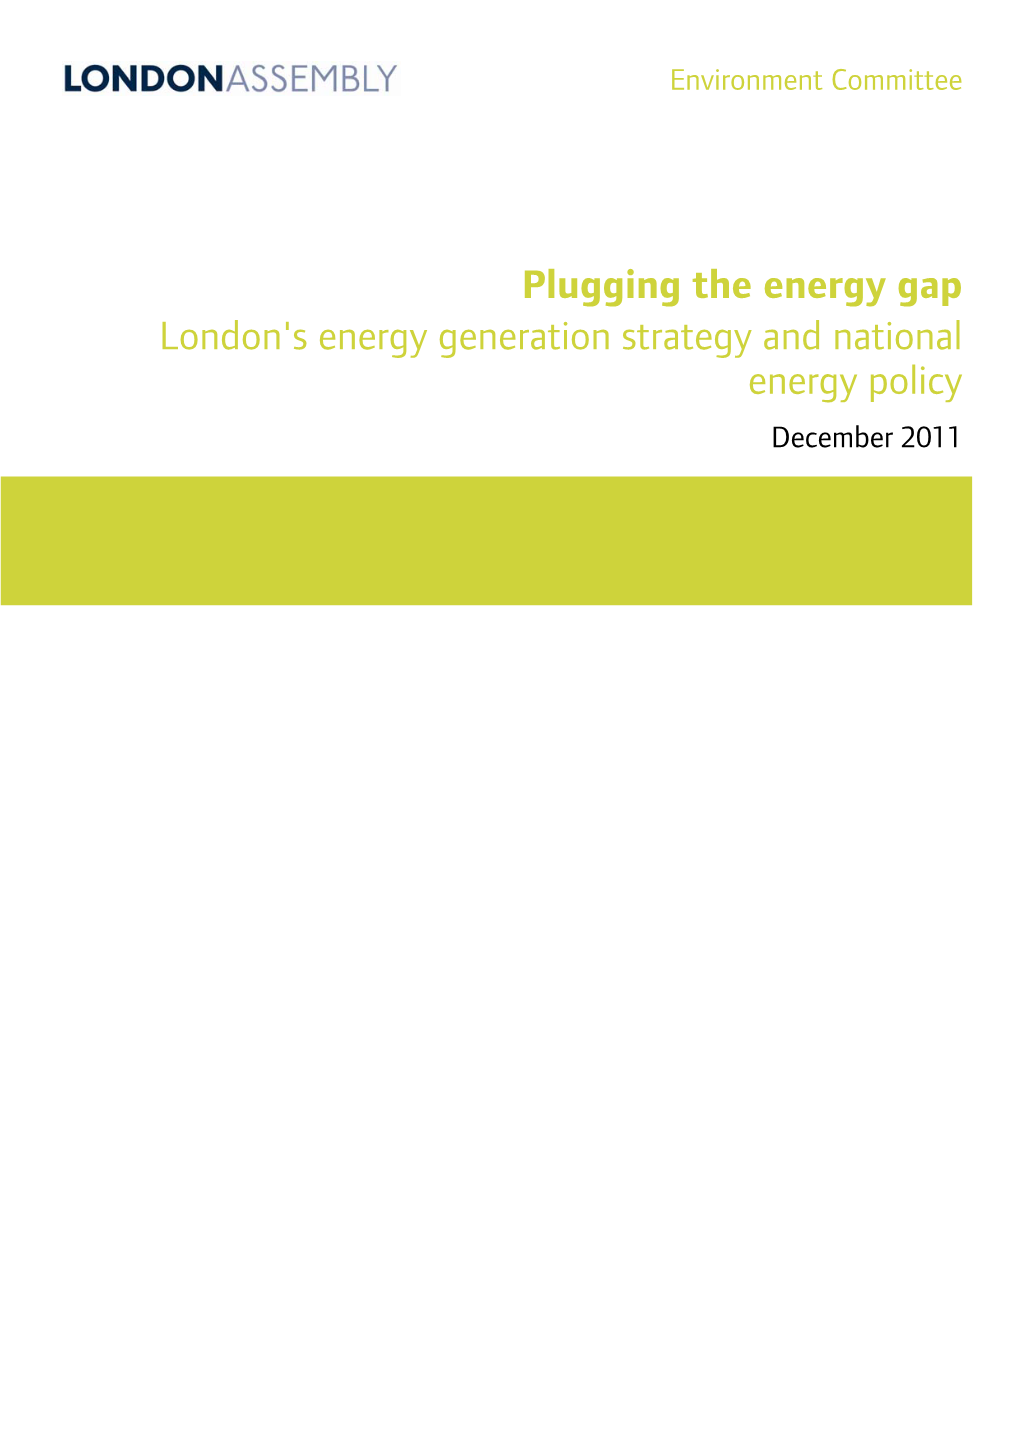 Plugging the Energy Gap London's Energy Generation Strategy and National Energy Policy